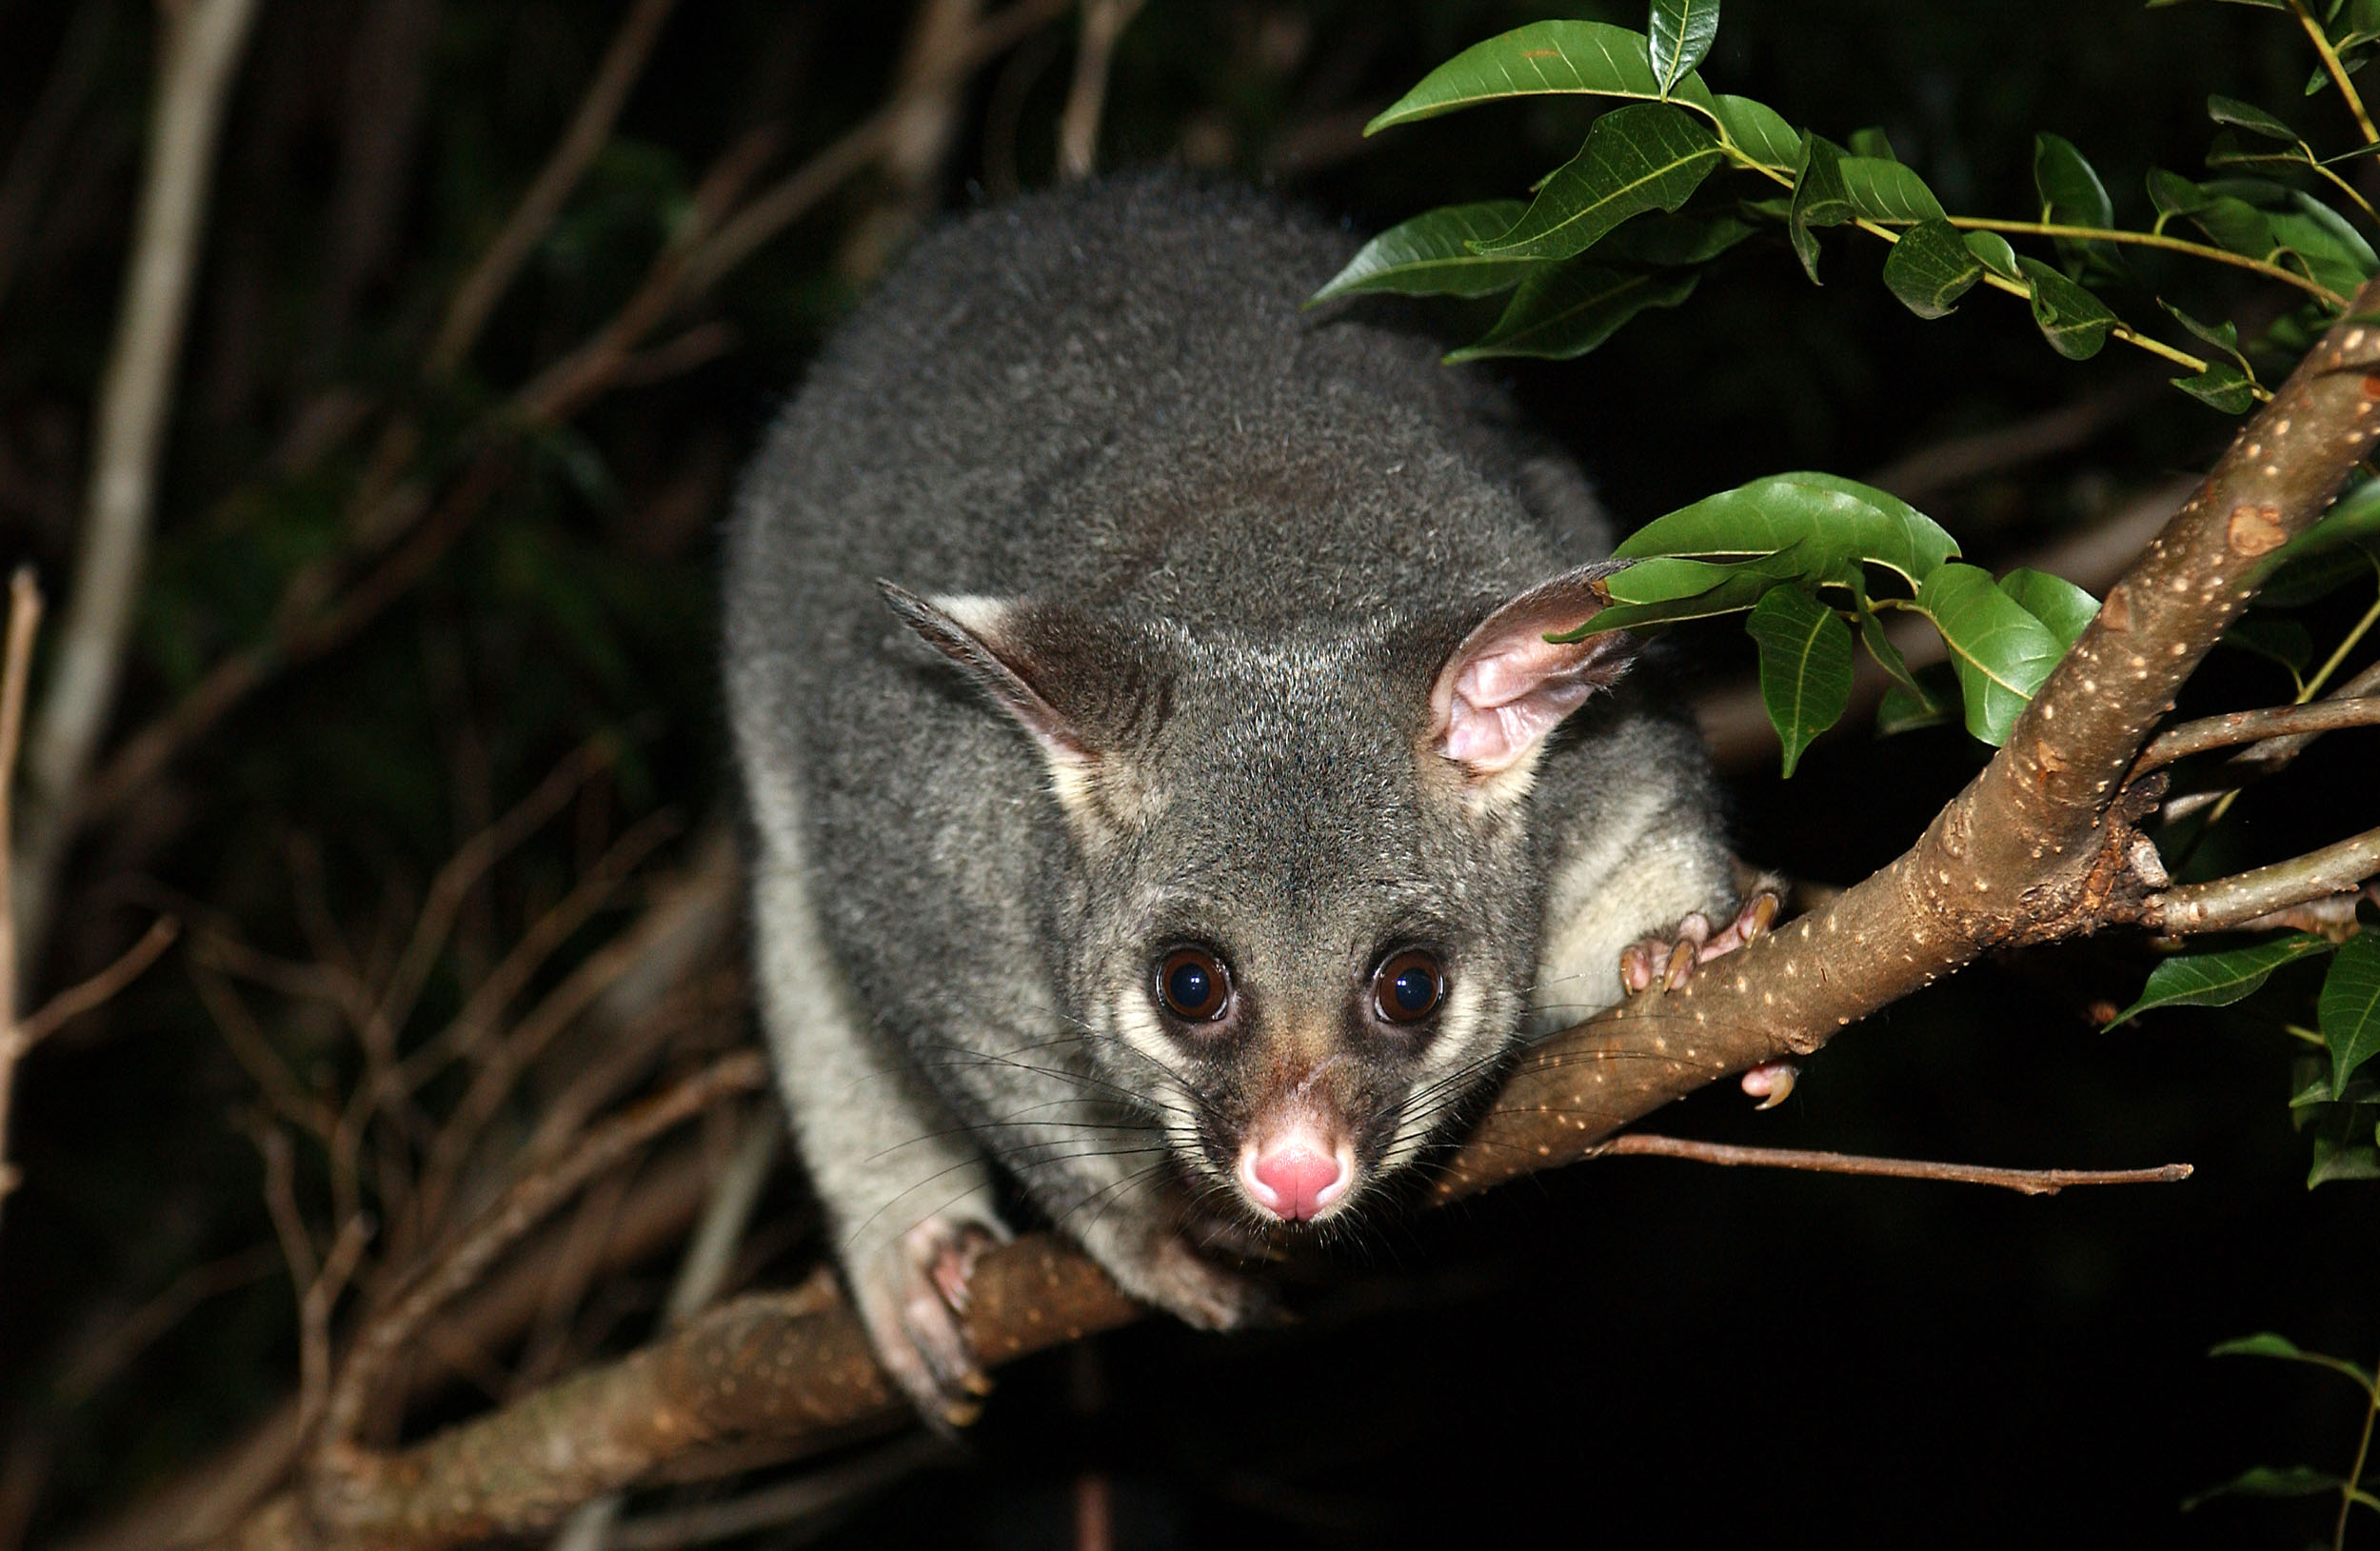 Help Stop the Use of Harmful Poison Meant for Possums That's Killing Other Animals